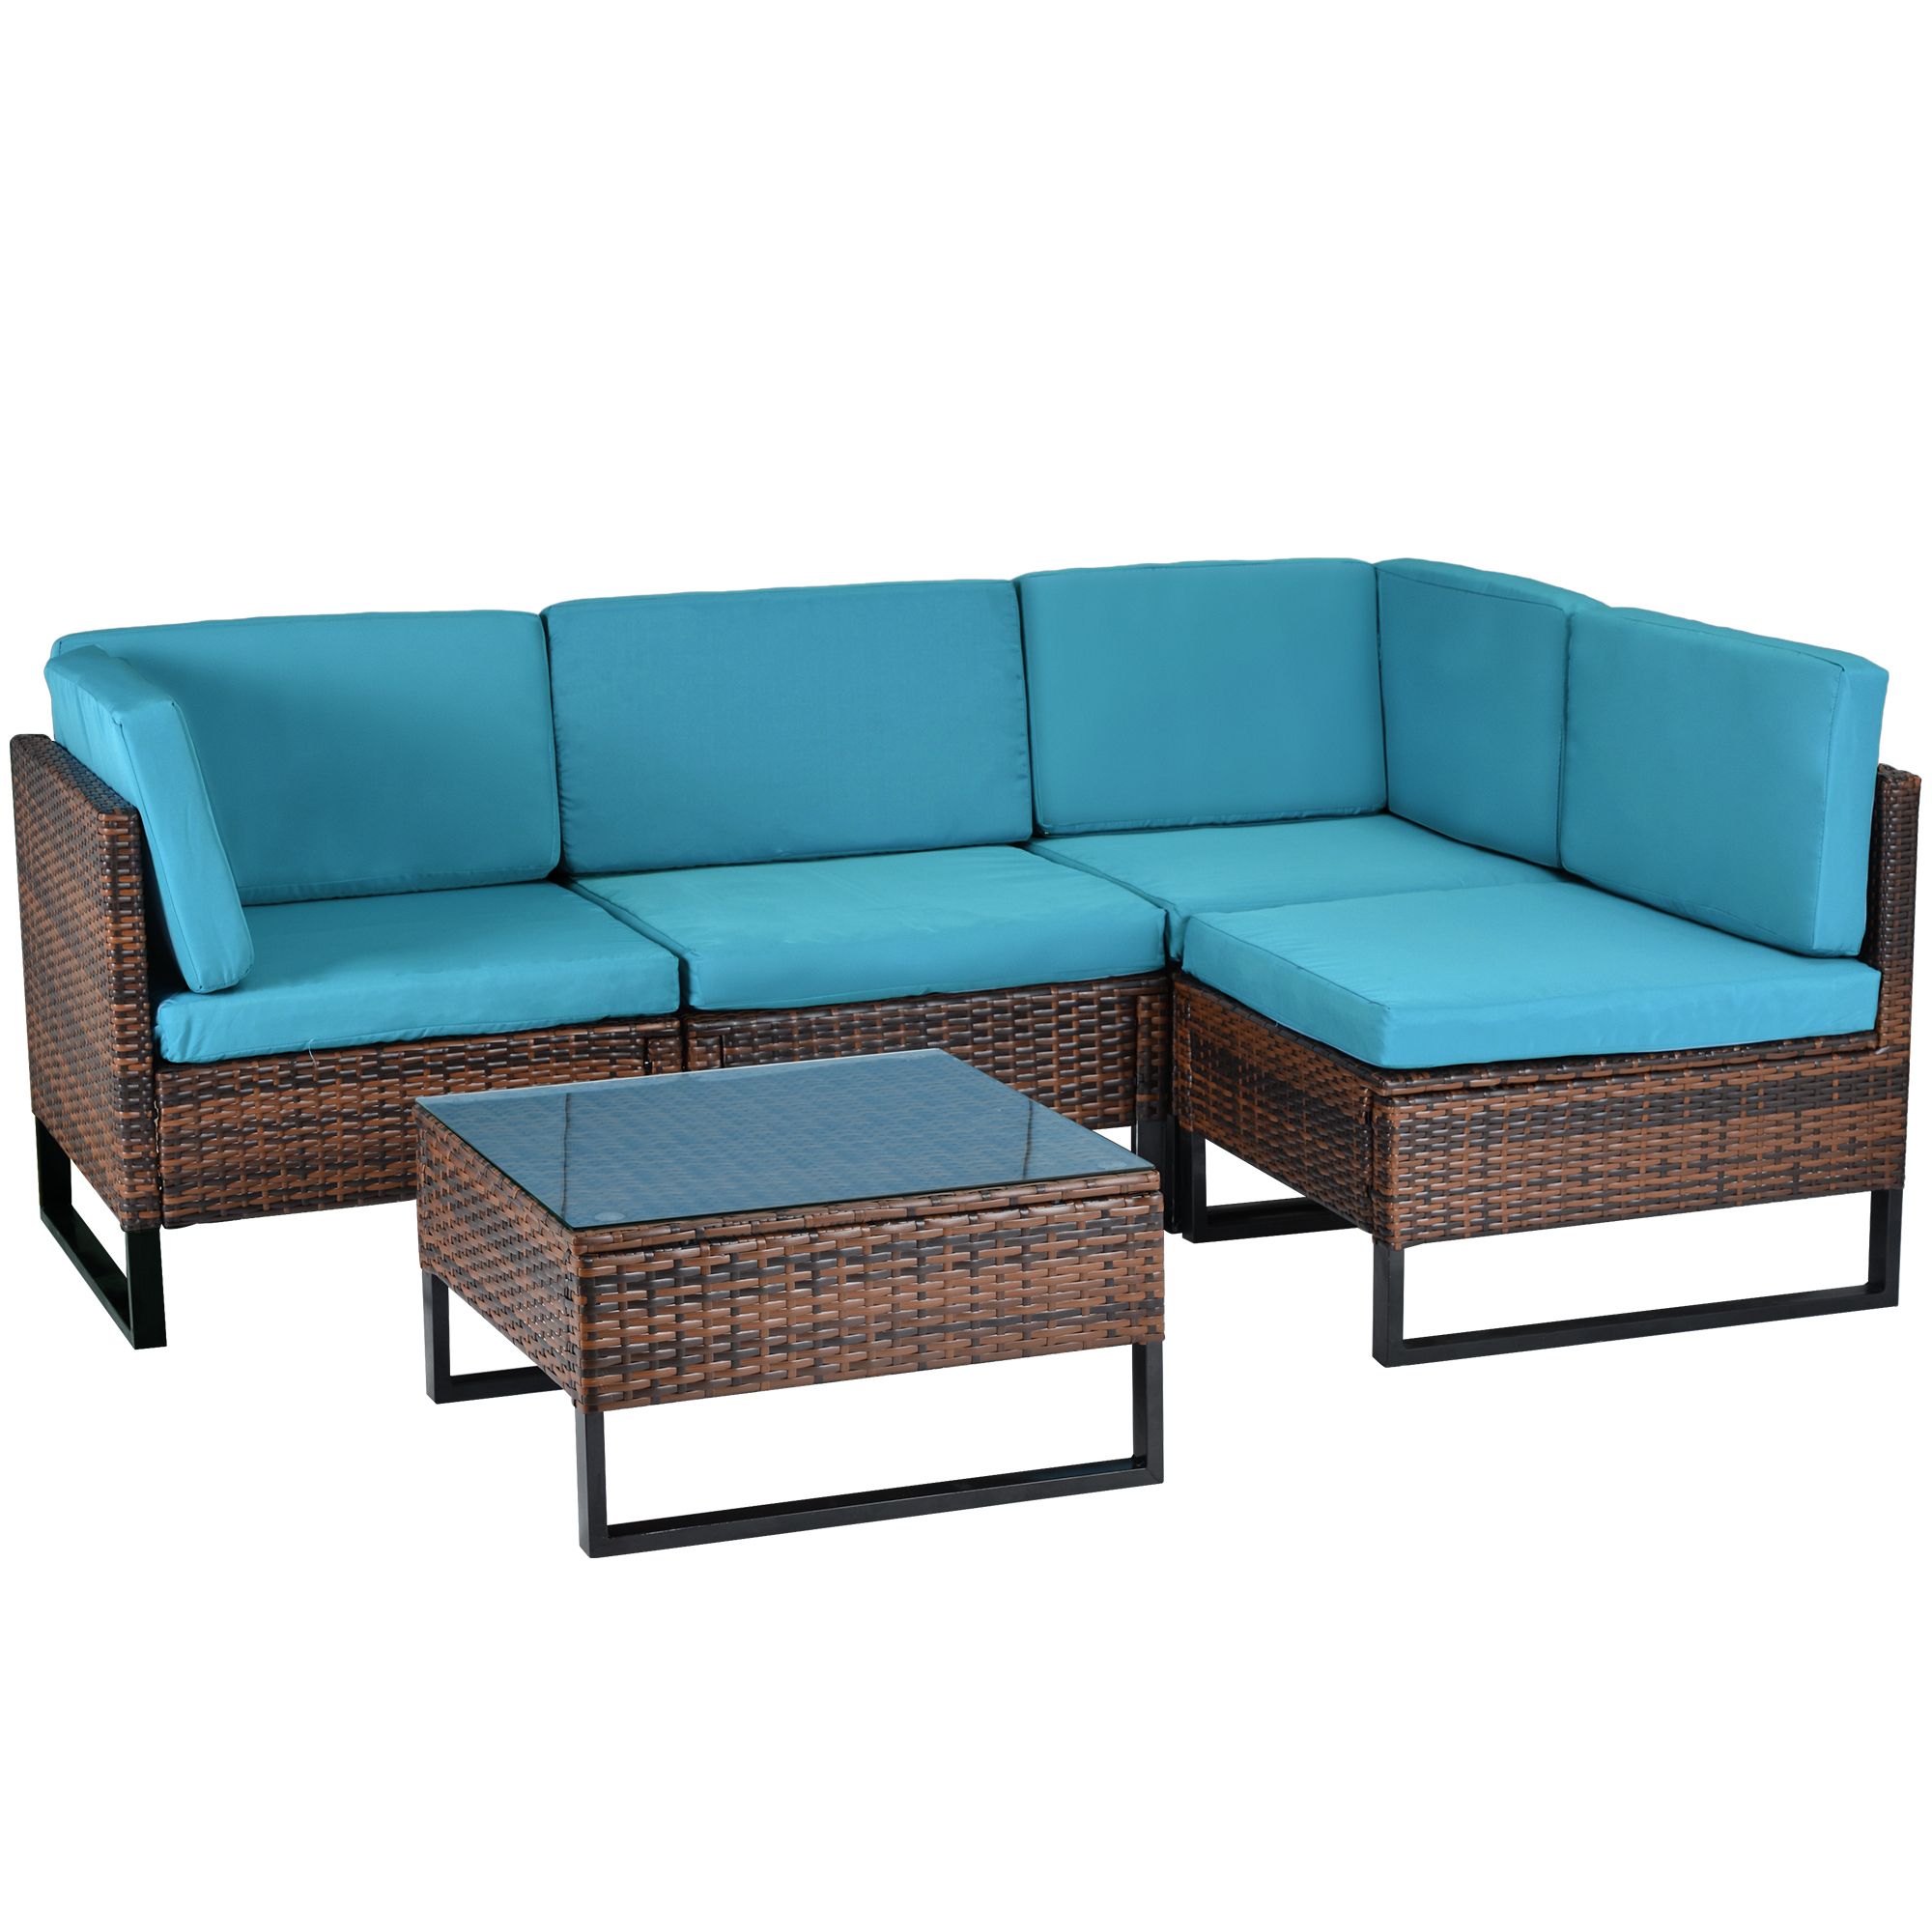 Wicker Patio Sectional Sets With Coffee Table, 2021 Pertaining To Recent 5 Piece Coffee Tables (View 15 of 20)